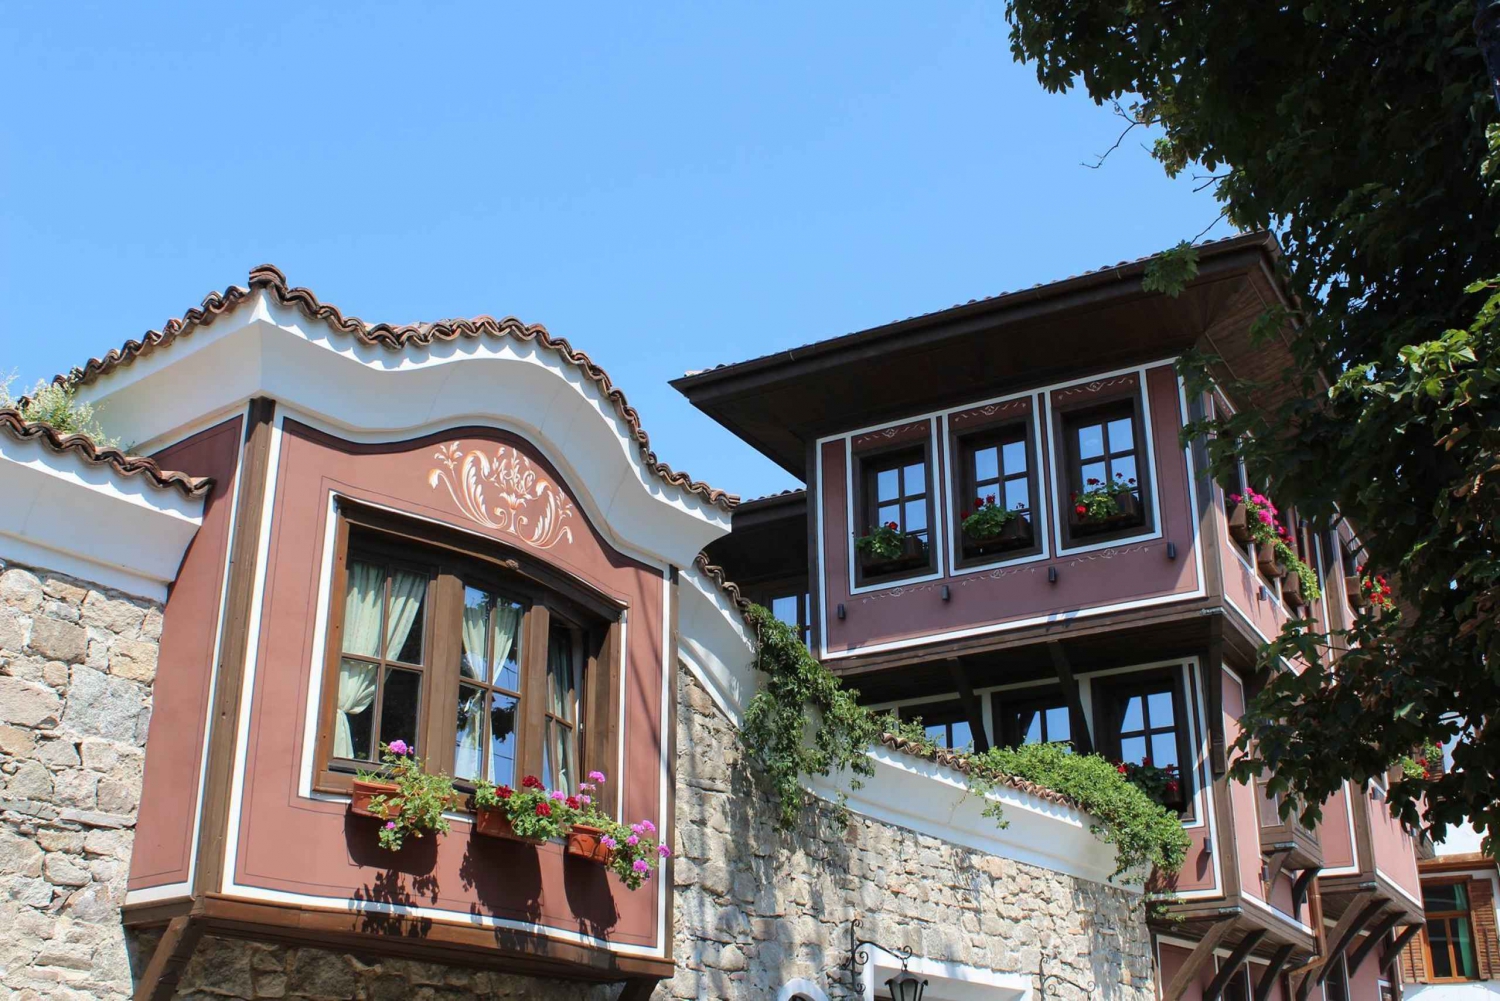 From Sofia: Full-Day Old Town Plovdiv Trip